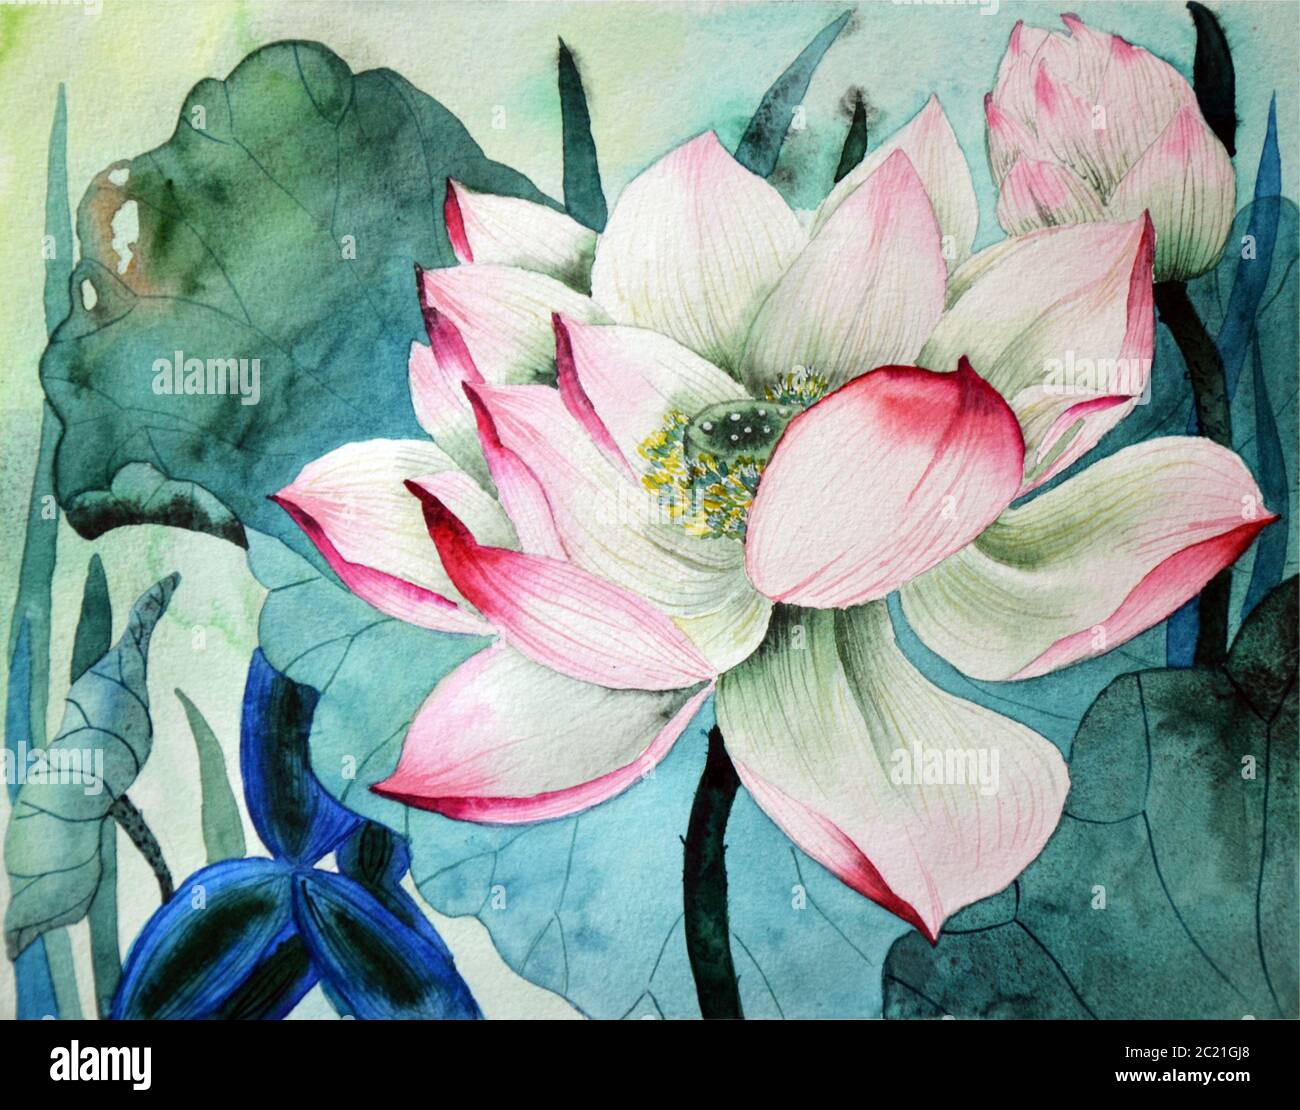 Lotus flower and seed pod. Watercolor illustration on white background Stock Photo